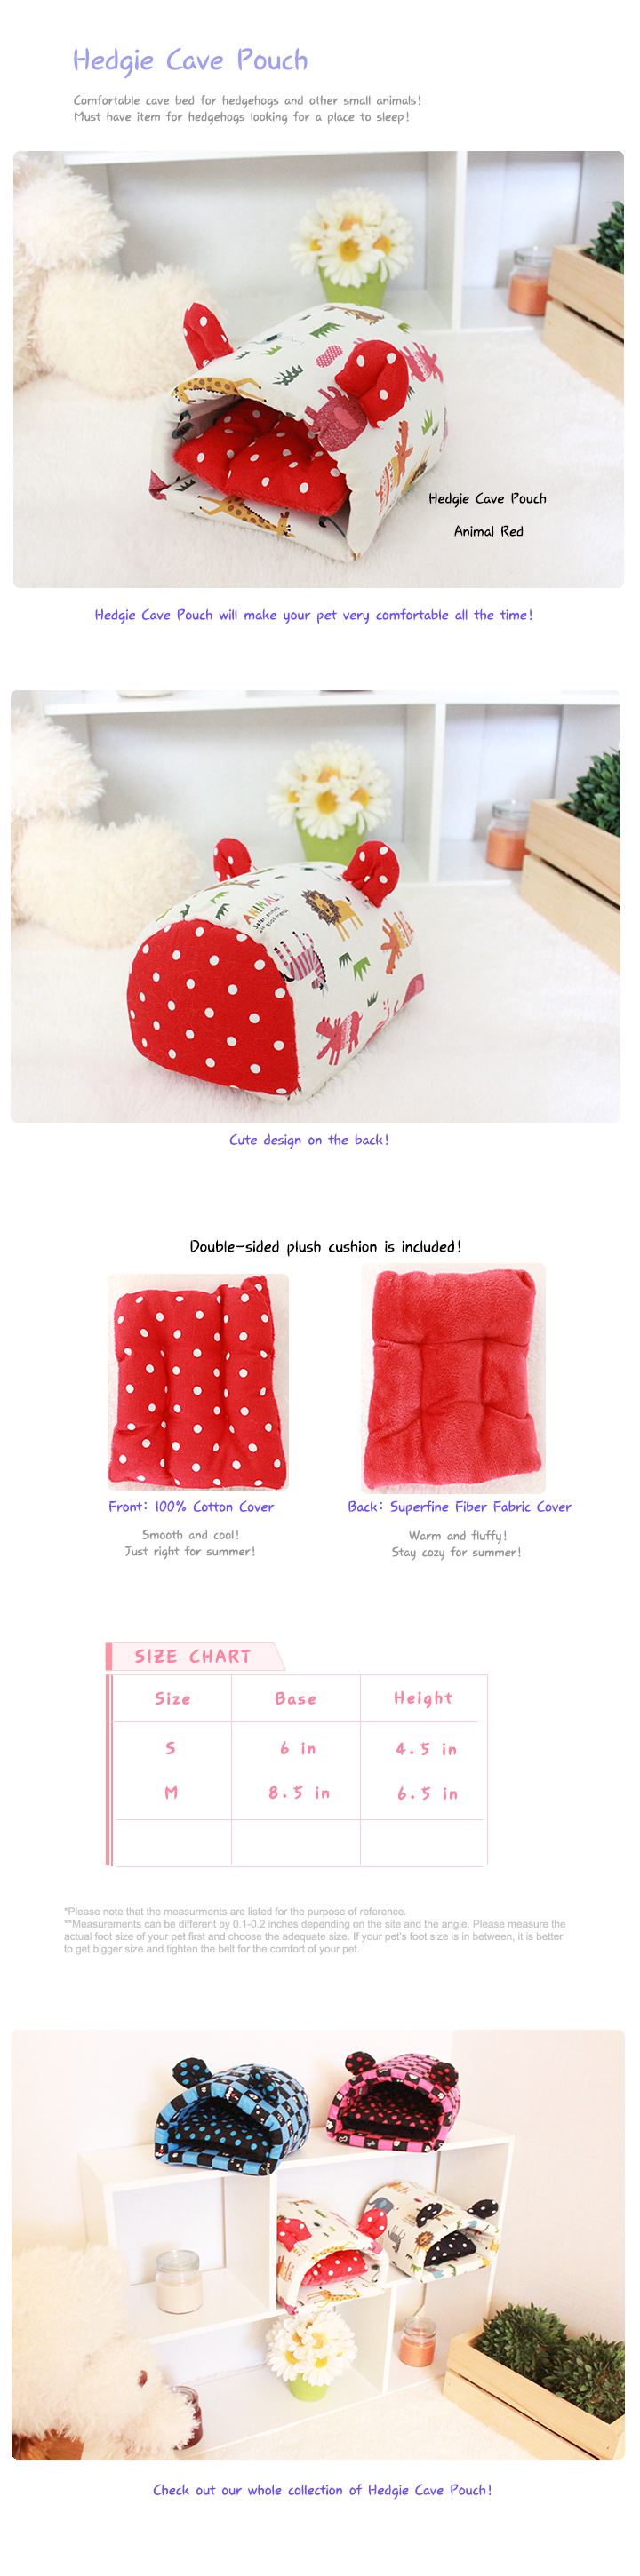 hedgie-cave-pouch-red-detail.png